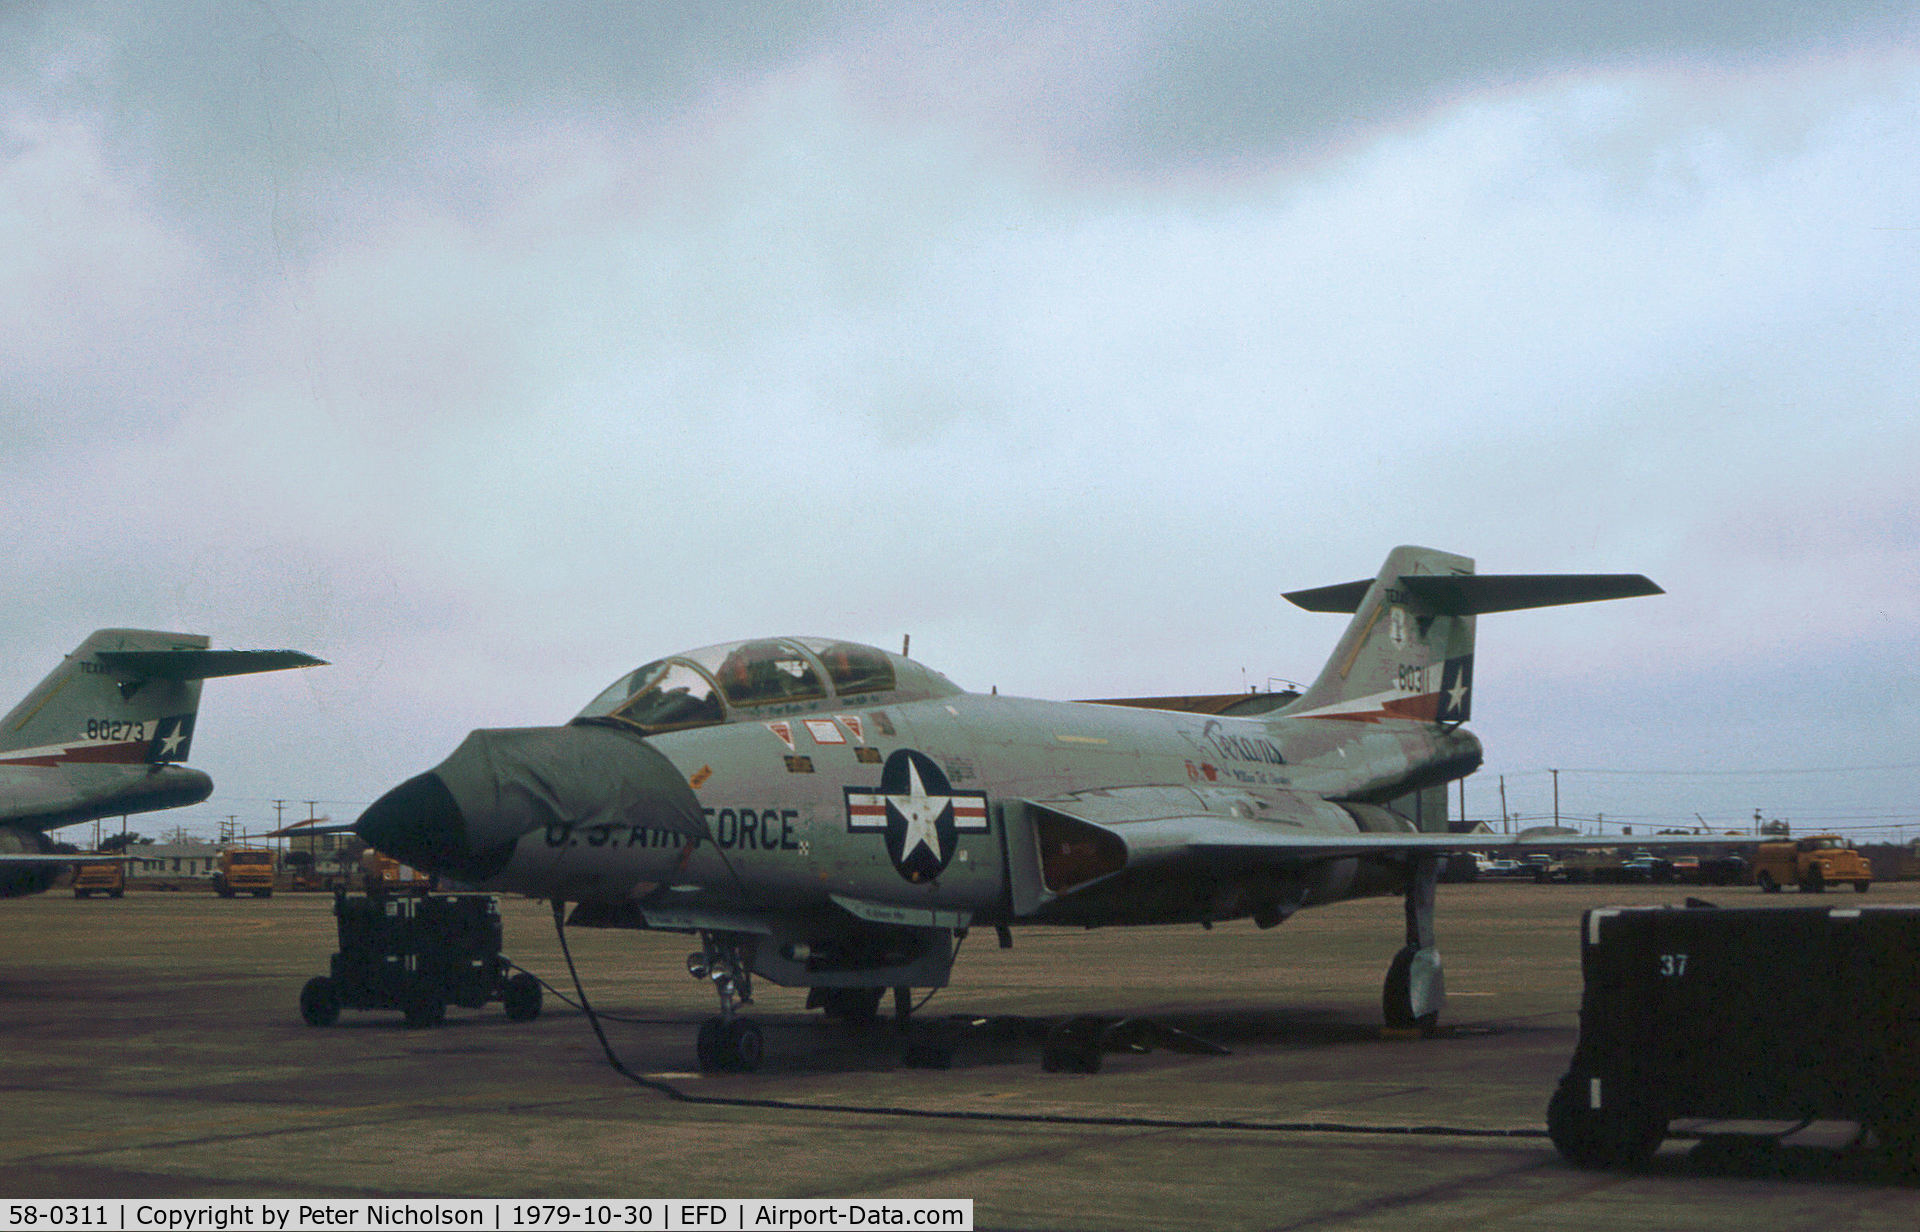 58-0311, 1958 McDonnell F-101F Voodoo C/N 683, Another view of this F-101F Voodoo on the flight-line at Ellington AFB in October 1979.